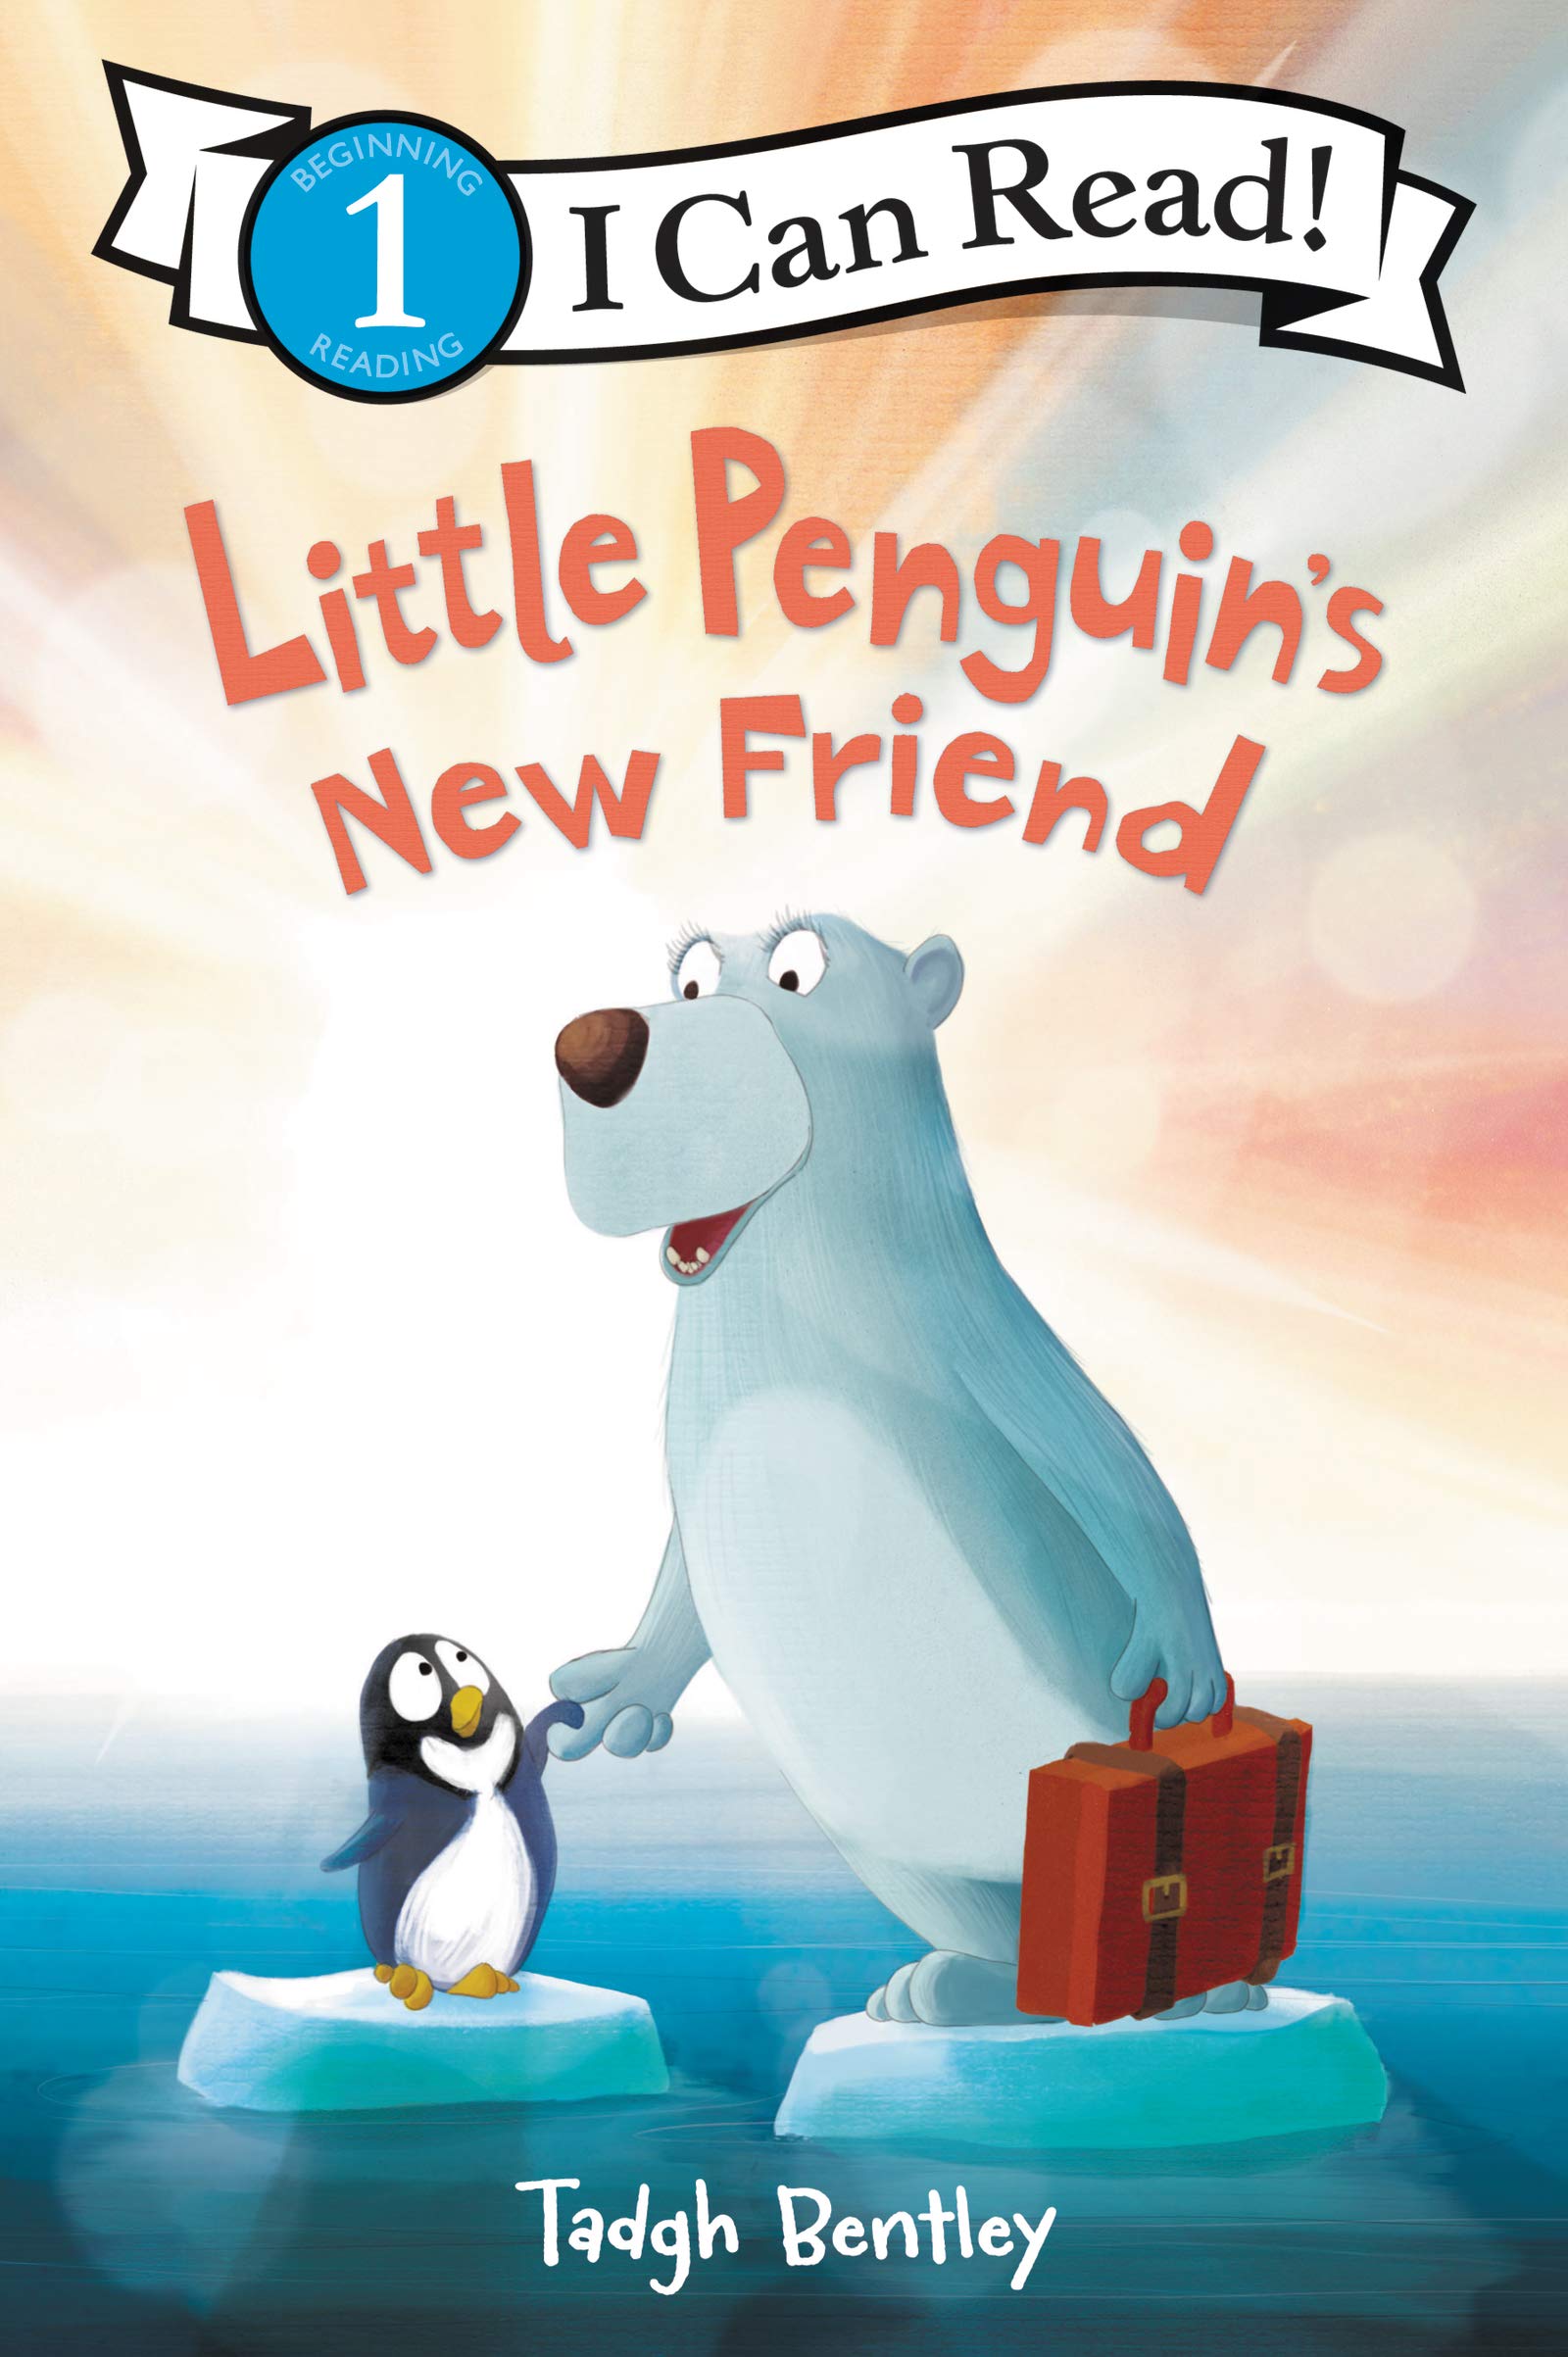 IMG : I can Read Level 1 Little Penguin's New Friend